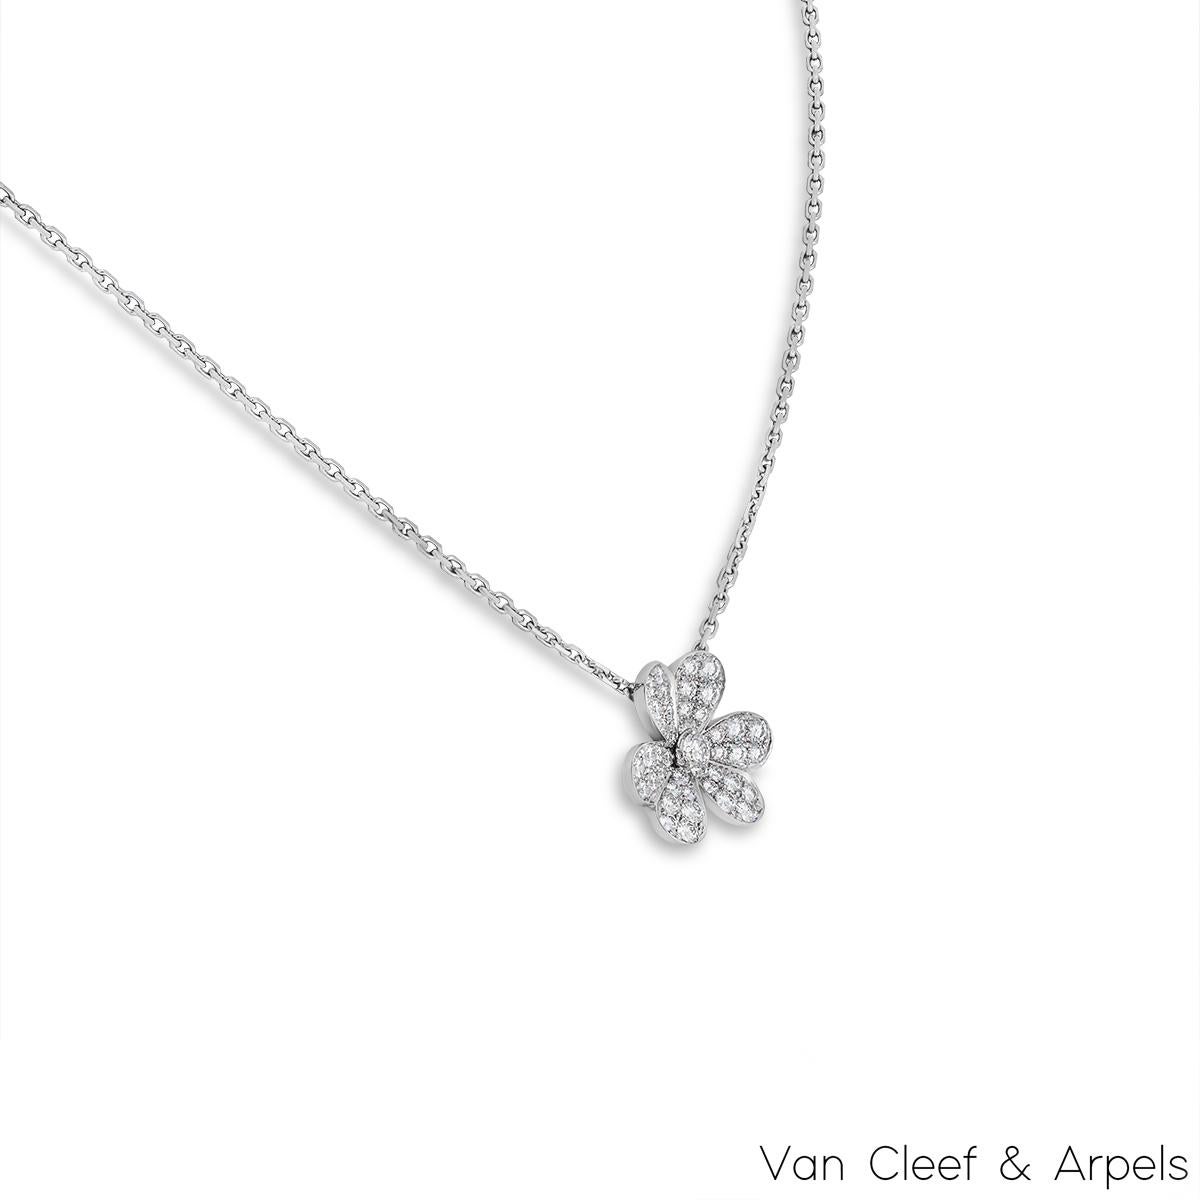 A gorgeous 18k white gold diamond pendant by Van Cleef & Arpels from the Frivole collection. The pendant features three diamond set heart shaped petals with a singular diamond in the centre. The 43 round brilliant cut diamonds have an approximate